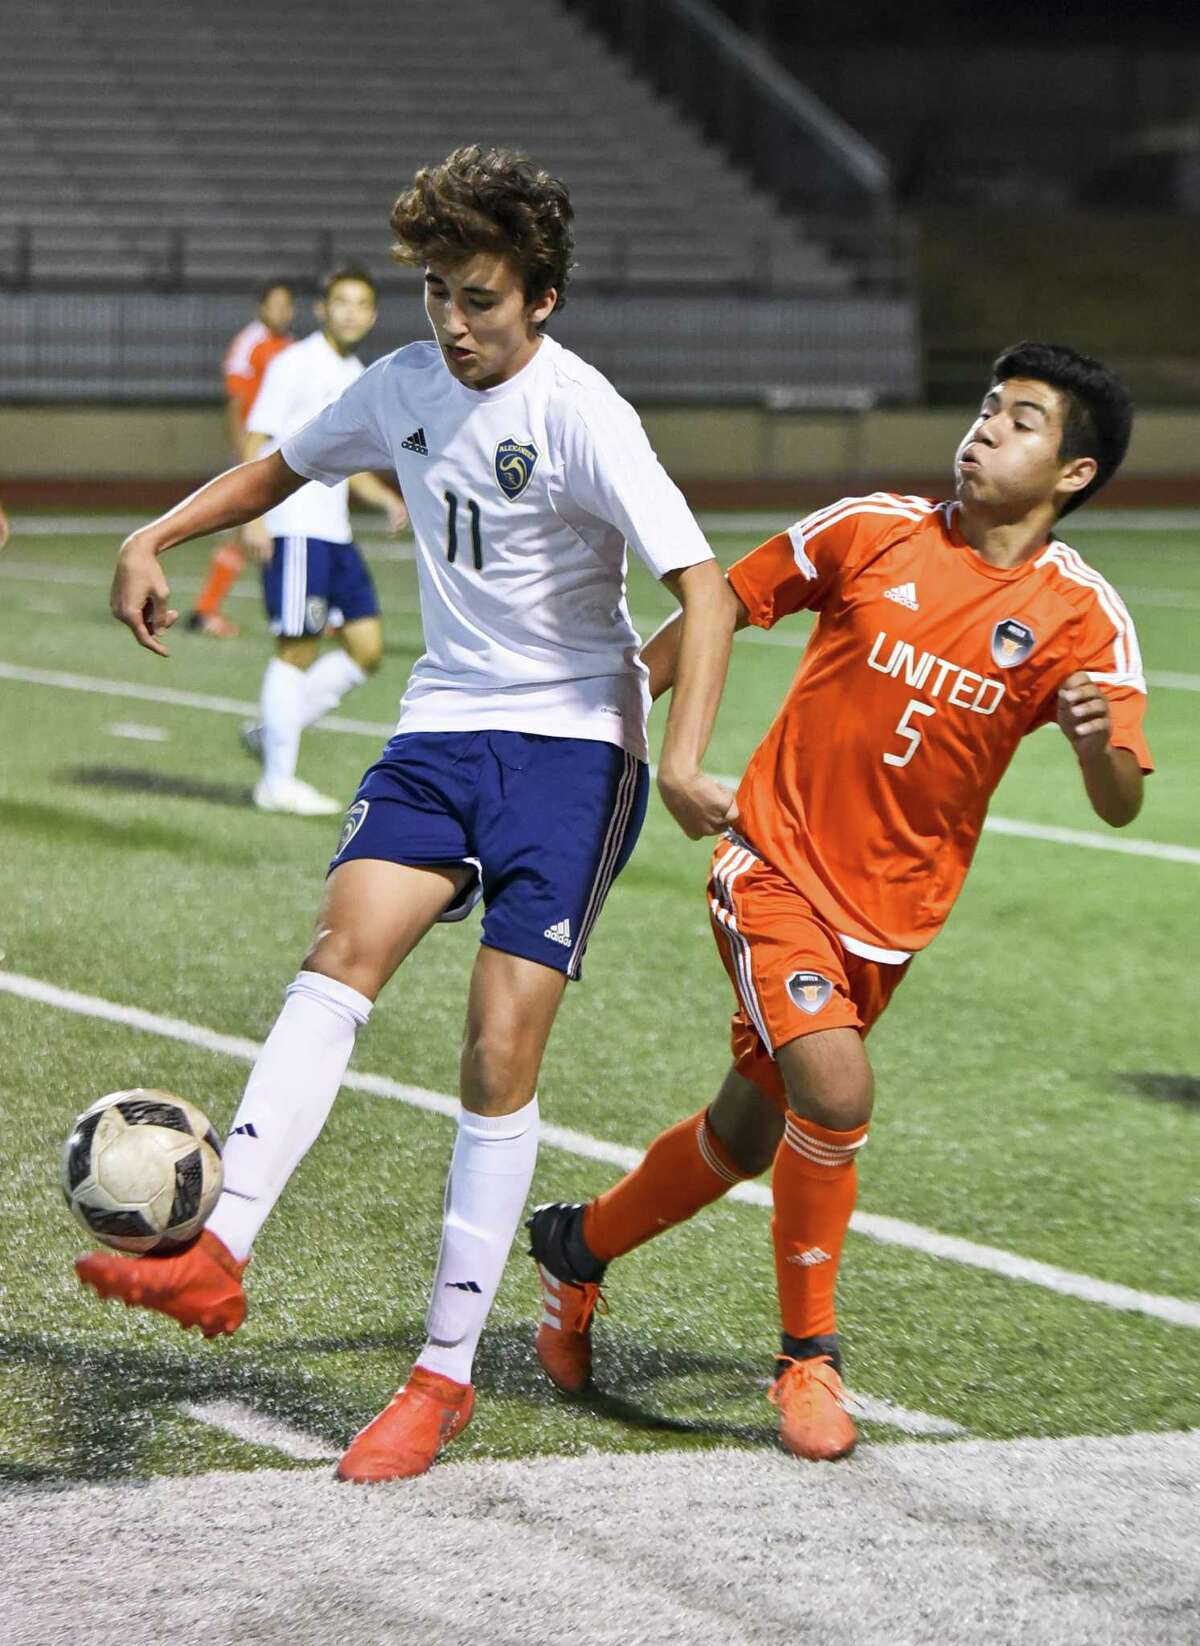 Alexander’s Max De Leon was named District 29-6A’s Most Valuable Player. He helped the Bulldogs finish runner-up in the district and claim their first bi-district championship since 2009.